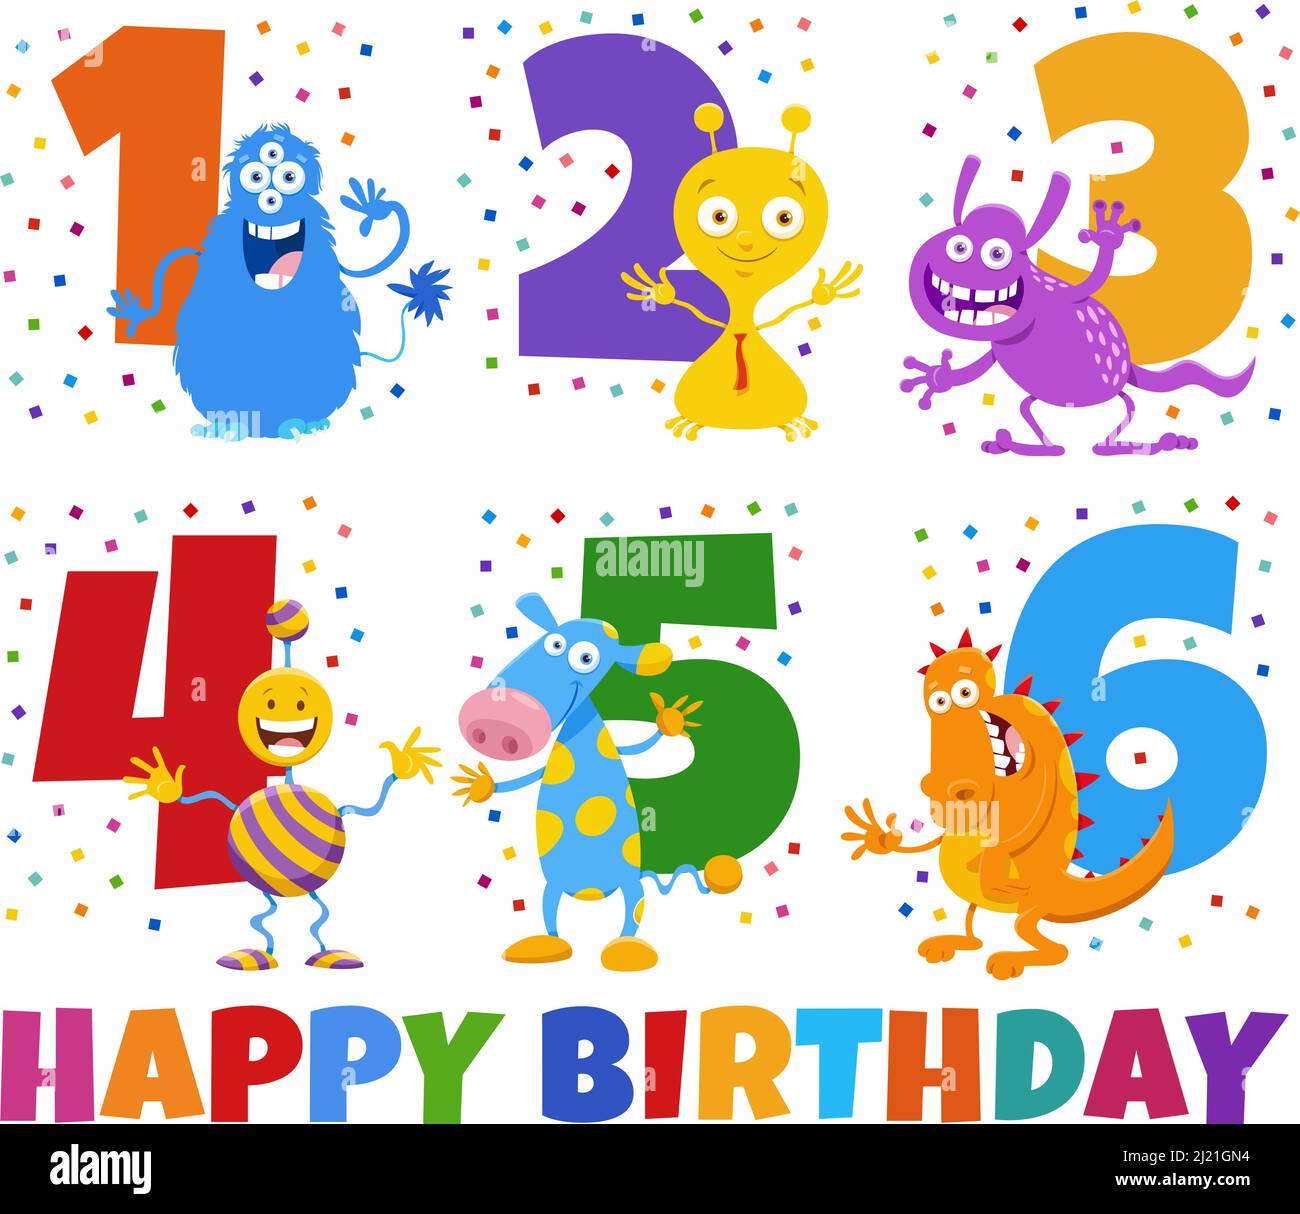 Cartoon illustration design of the birthday greeting cards set for children with cute monster characters Stock Vector